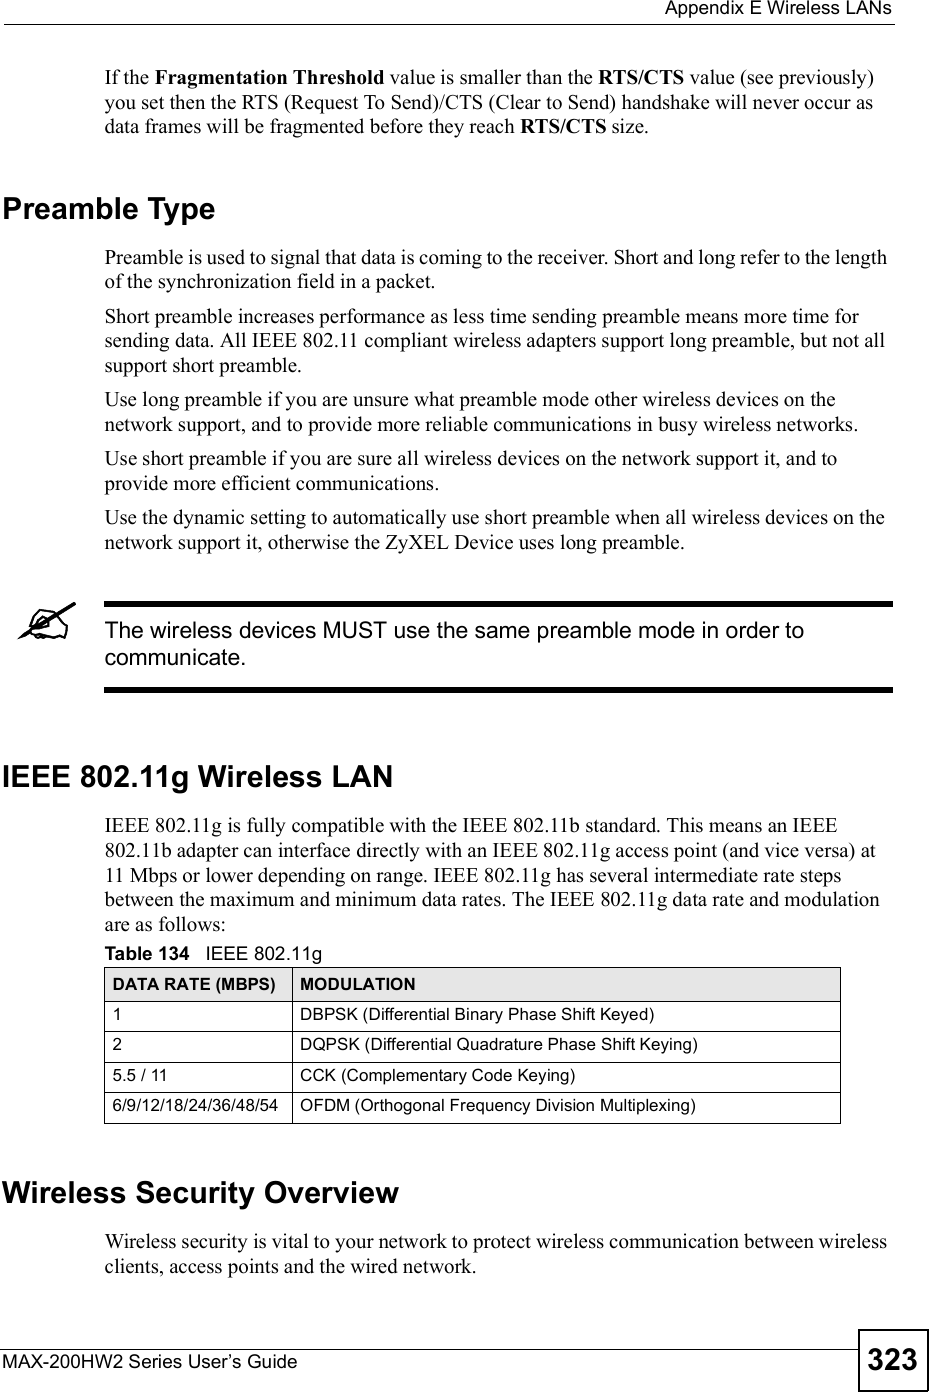  Appendix EWireless LANsMAX-200HW2 Series User s Guide 323If the Fragmentation Threshold value is smaller than the RTS/CTS value (see previously) you set then the RTS (Request To Send)/CTS (Clear to Send) handshake will never occur as data frames will be fragmented before they reach RTS/CTS size.Preamble TypePreamble is used to signal that data is coming to the receiver. Short and long refer to the length of the synchronization field in a packet.Short preamble increases performance as less time sending preamble means more time for sending data. All IEEE 802.11 compliant wireless adapters support long preamble, but not all support short preamble. Use long preamble if you are unsure what preamble mode other wireless devices on the network support, and to provide more reliable communications in busy wireless networks. Use short preamble if you are sure all wireless devices on the network support it, and to provide more efficient communications.Use the dynamic setting to automatically use short preamble when all wireless devices on the network support it, otherwise the ZyXEL Device uses long preamble.The wireless devices MUSTuse the same preamble mode in order to communicate.IEEE 802.11g Wireless LANIEEE 802.11g is fully compatible with the IEEE 802.11b standard. This means an IEEE 802.11b adapter can interface directly with an IEEE 802.11g access point (and vice versa) at 11 Mbps or lower depending on range. IEEE 802.11g has several intermediate rate steps between the maximum and minimum data rates. The IEEE 802.11g data rate and modulation are as follows:Wireless Security OverviewWireless security is vital to your network to protect wireless communication between wireless clients, access points and the wired network.Table 134   IEEE 802.11gDATA RATE (MBPS) MODULATION1DBPSK (Differential Binary Phase Shift Keyed)2DQPSK (Differential Quadrature Phase Shift Keying)5.5 / 11CCK (Complementary Code Keying) 6/9/12/18/24/36/48/54OFDM (Orthogonal Frequency Division Multiplexing) 